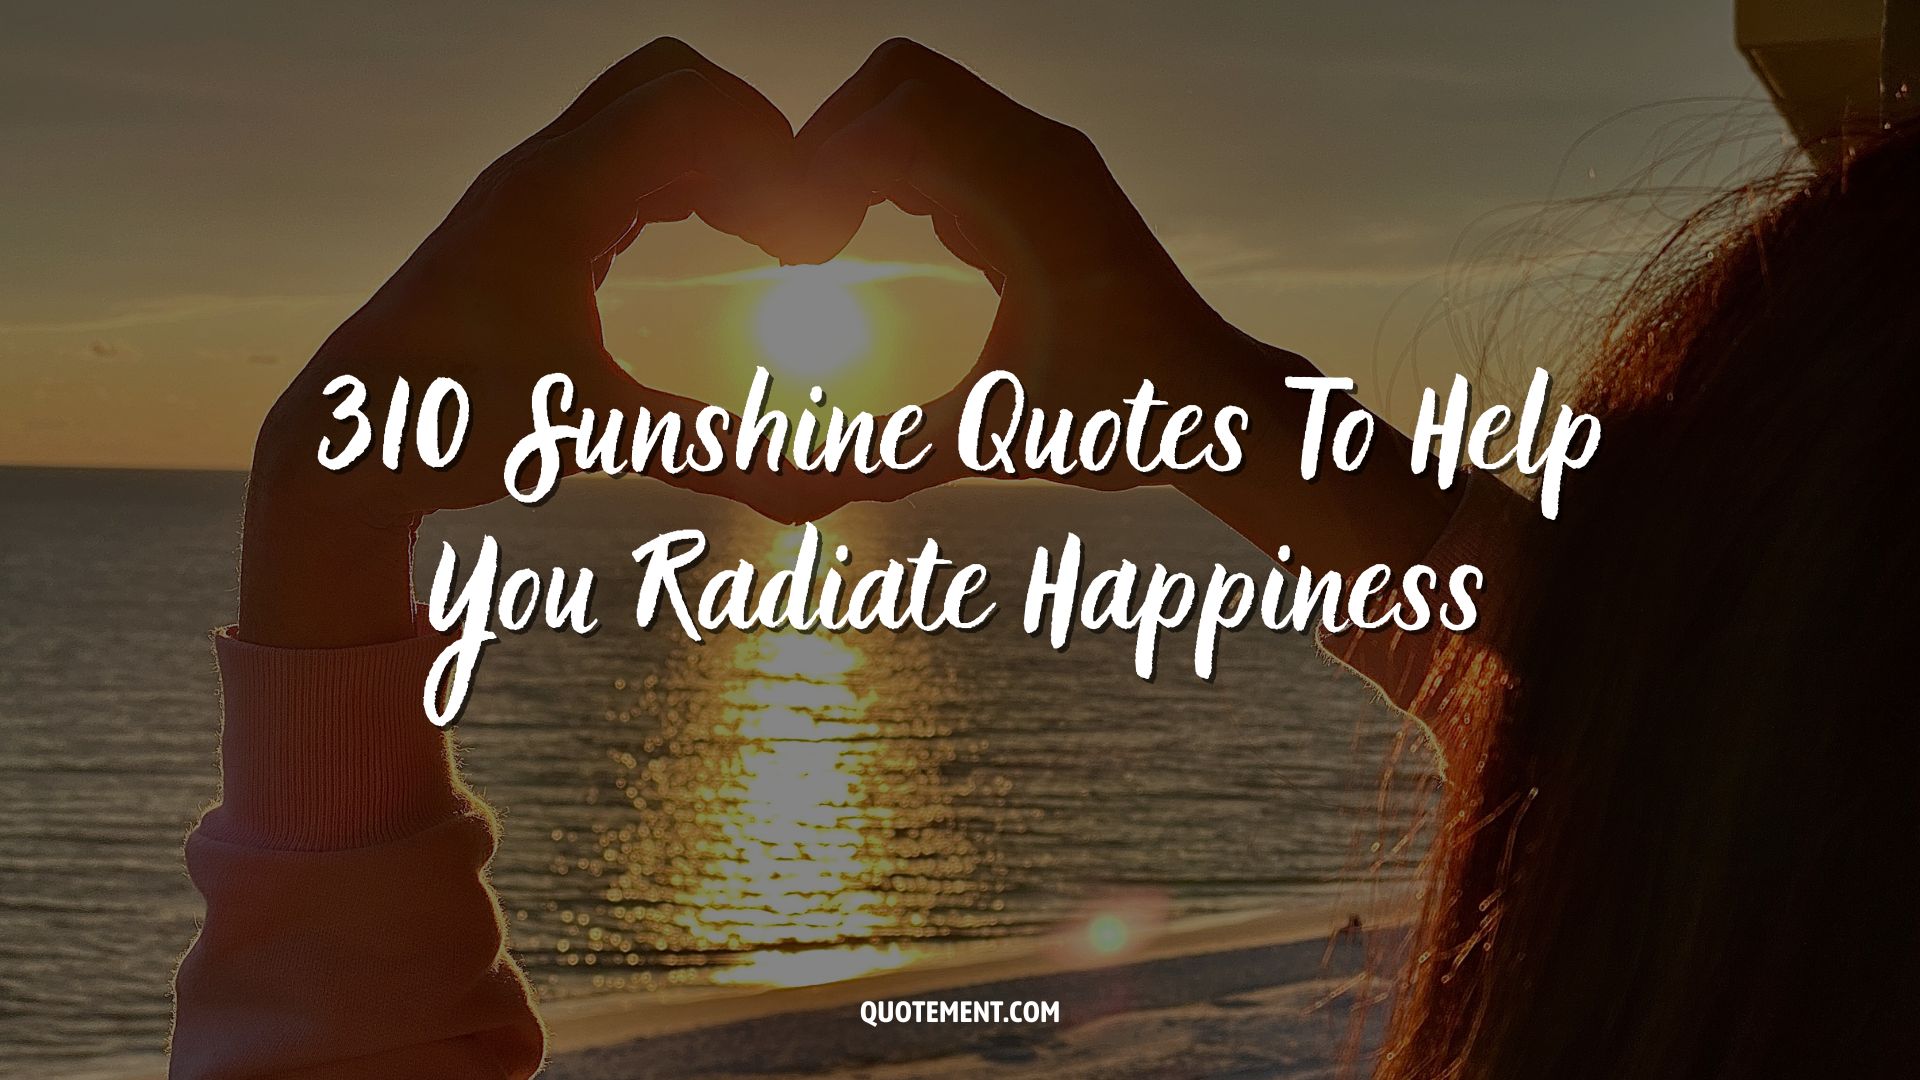 310 Sunshine Quotes To Help You Radiate Happiness